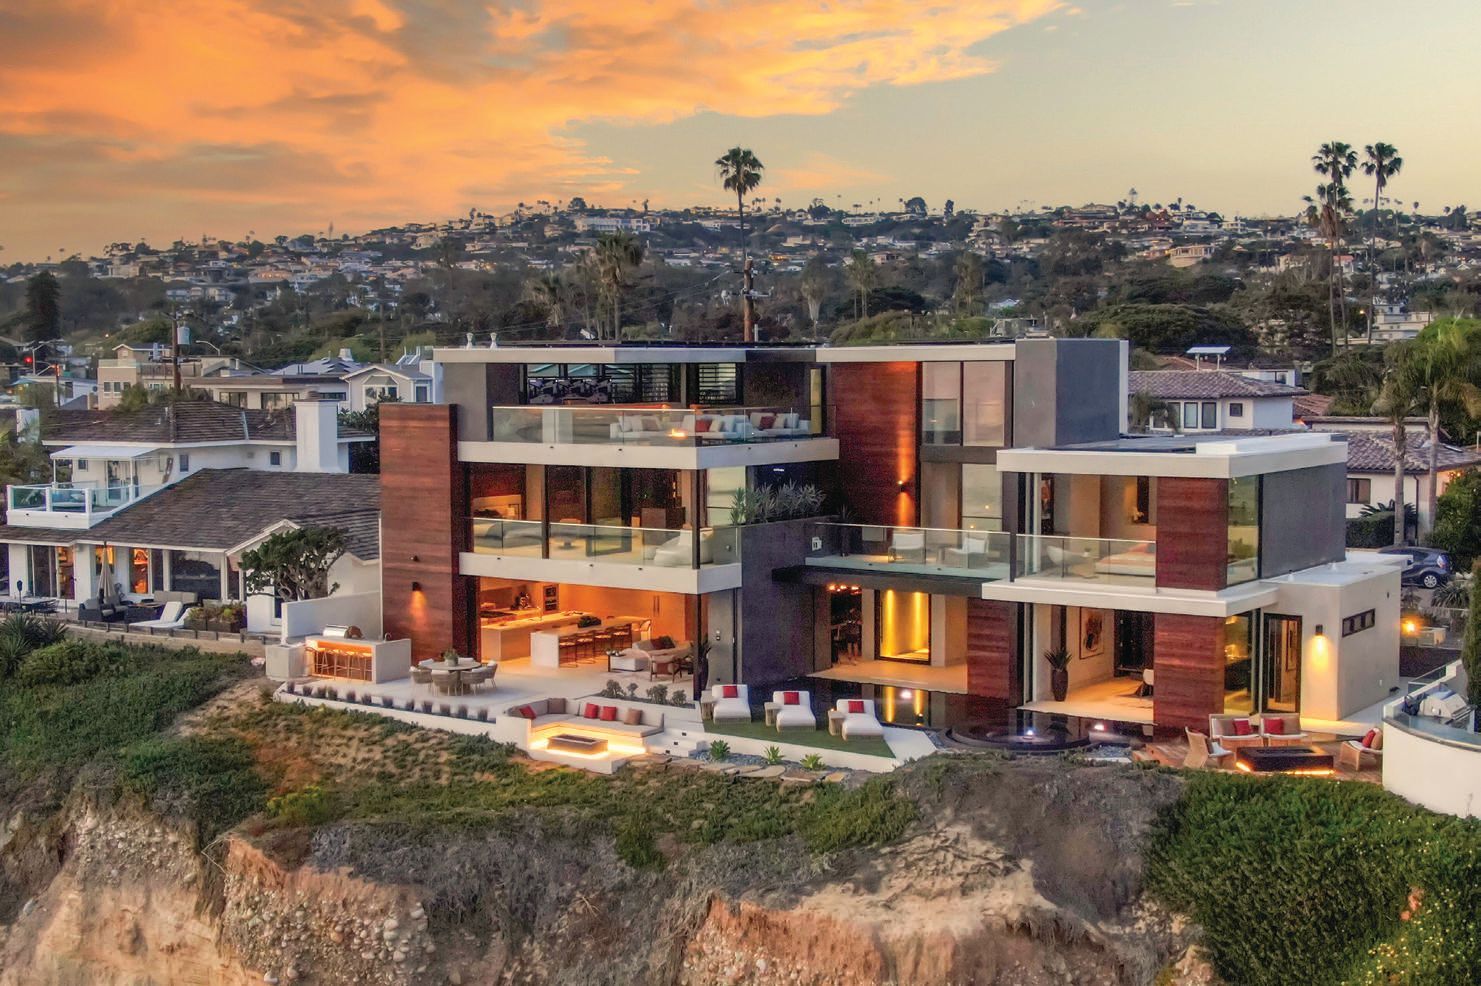 Designed by Blue Heron, The Ora House in La Jolla sold for an astounding $22.5 million in April 2023 PHOTO COURTESY OF: BLUE HERON